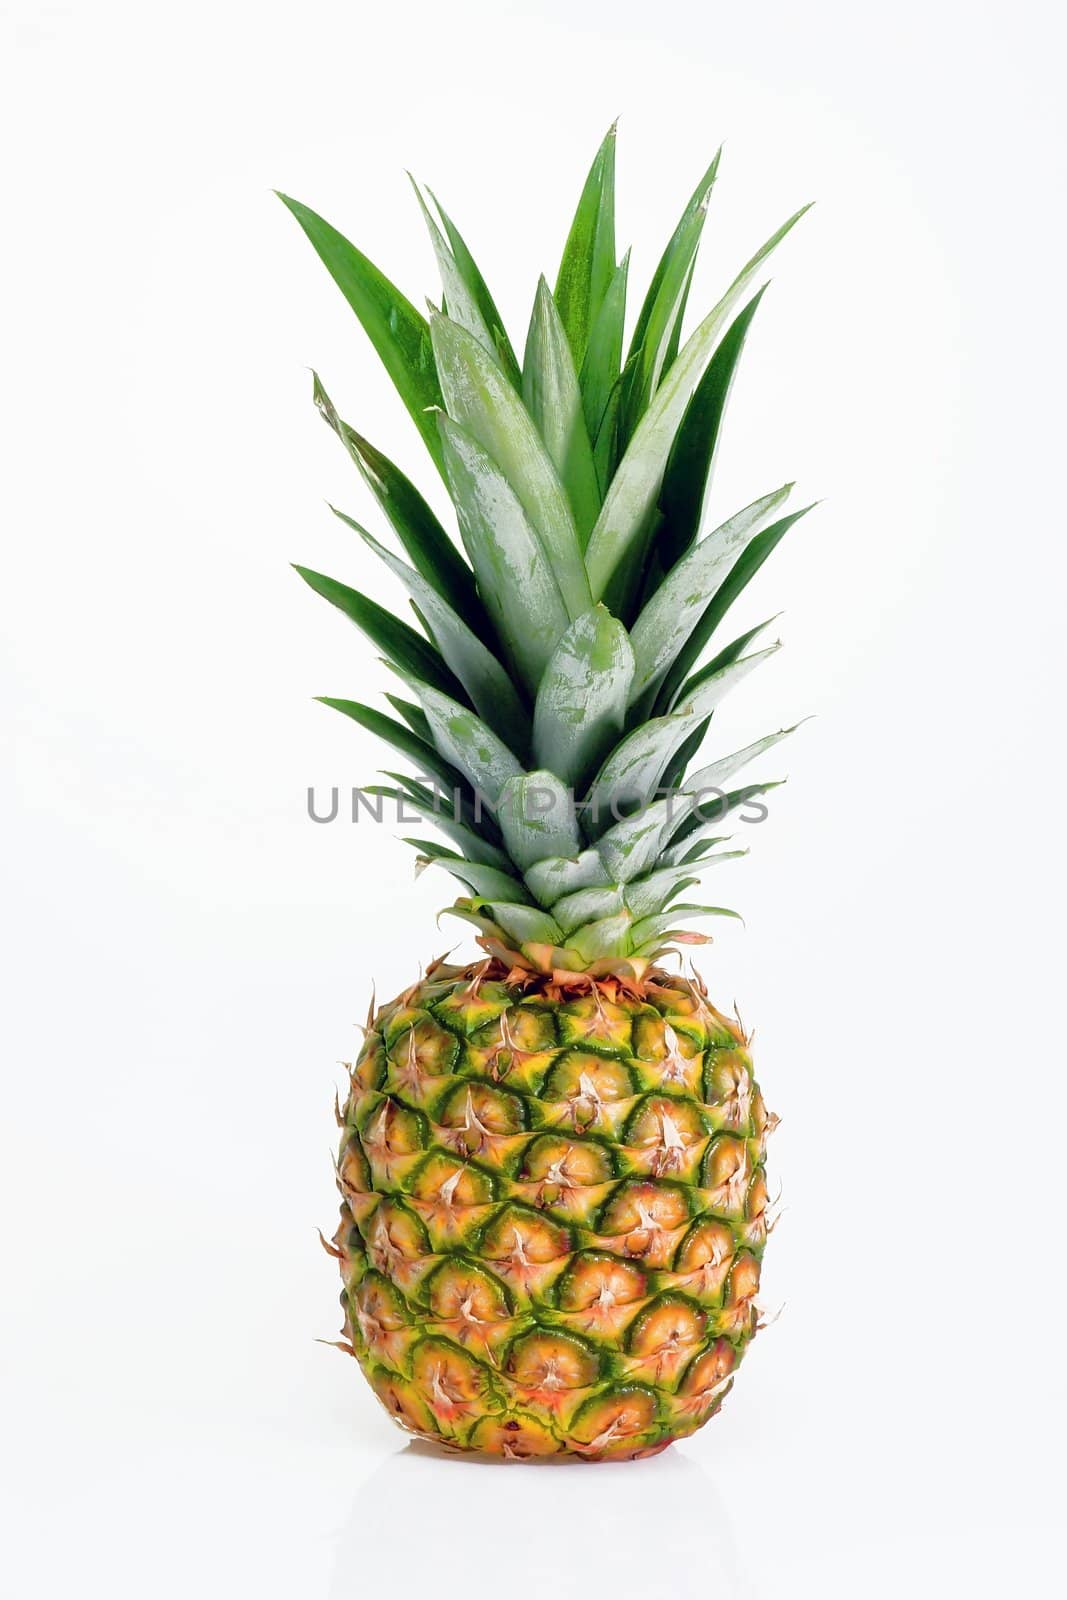 Pineapple fruit isolated on a white background.
